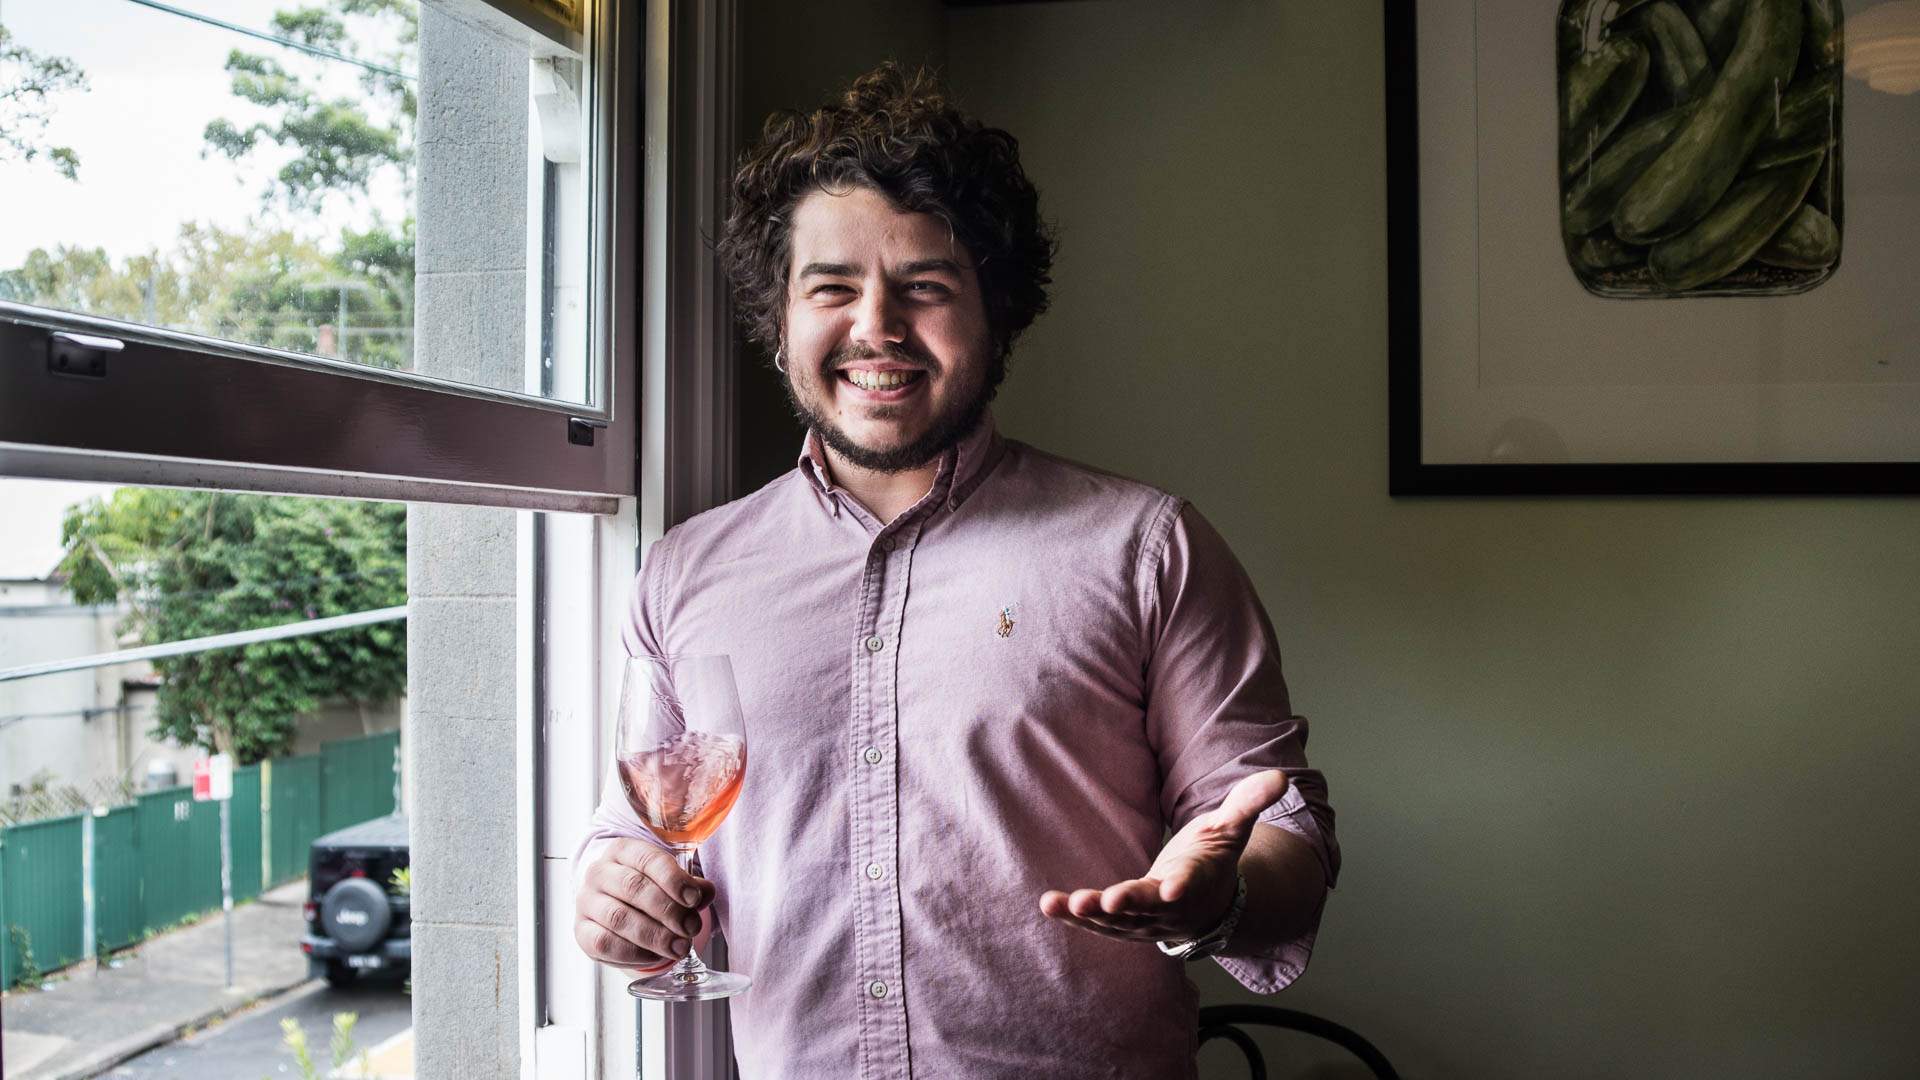 What Do The World's Best Sommeliers Think of Australian Wine?